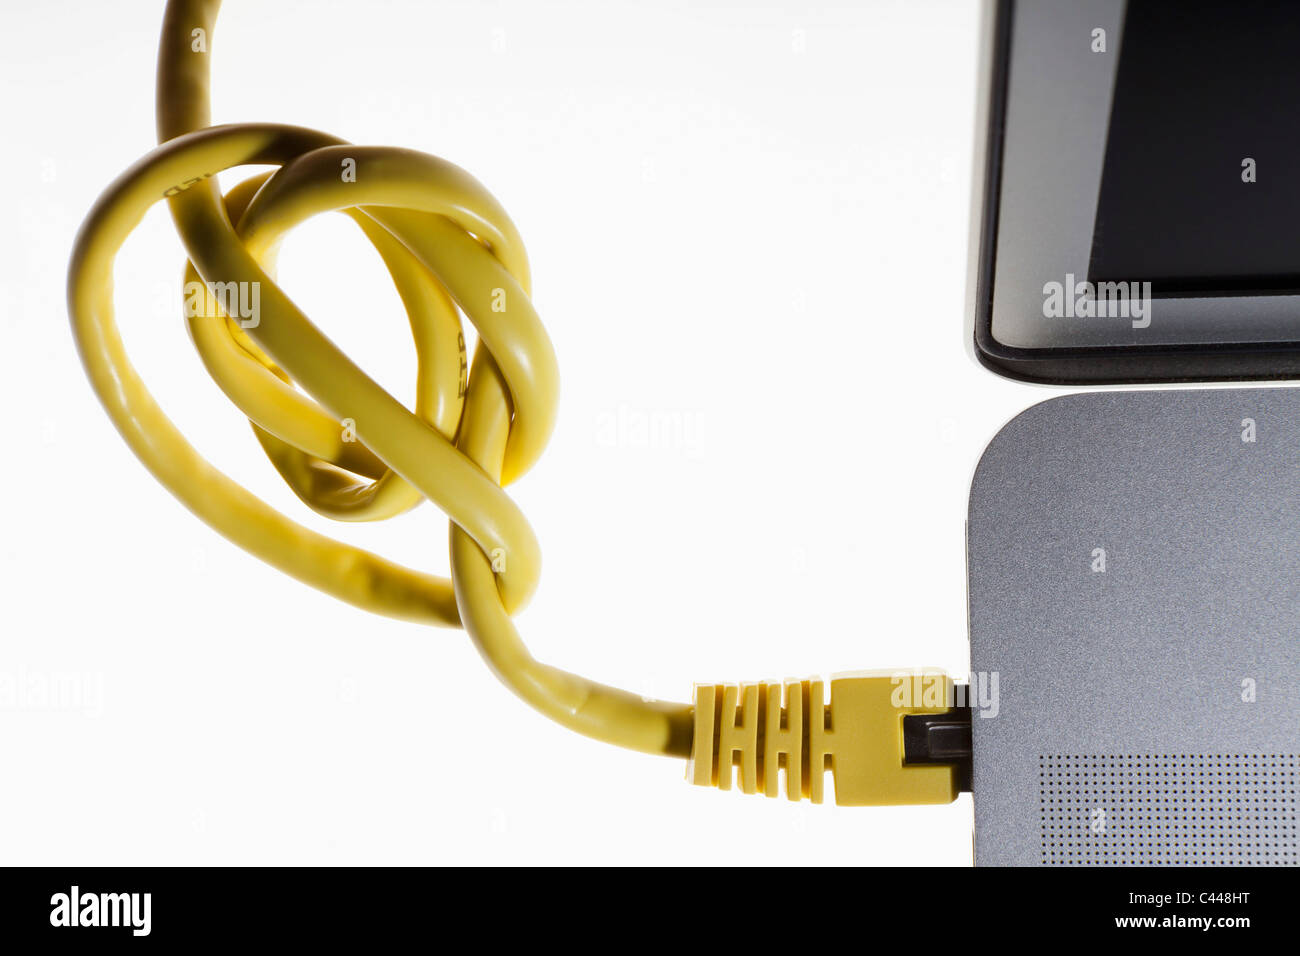 A tangled network cord plugged into a laptop Stock Photo